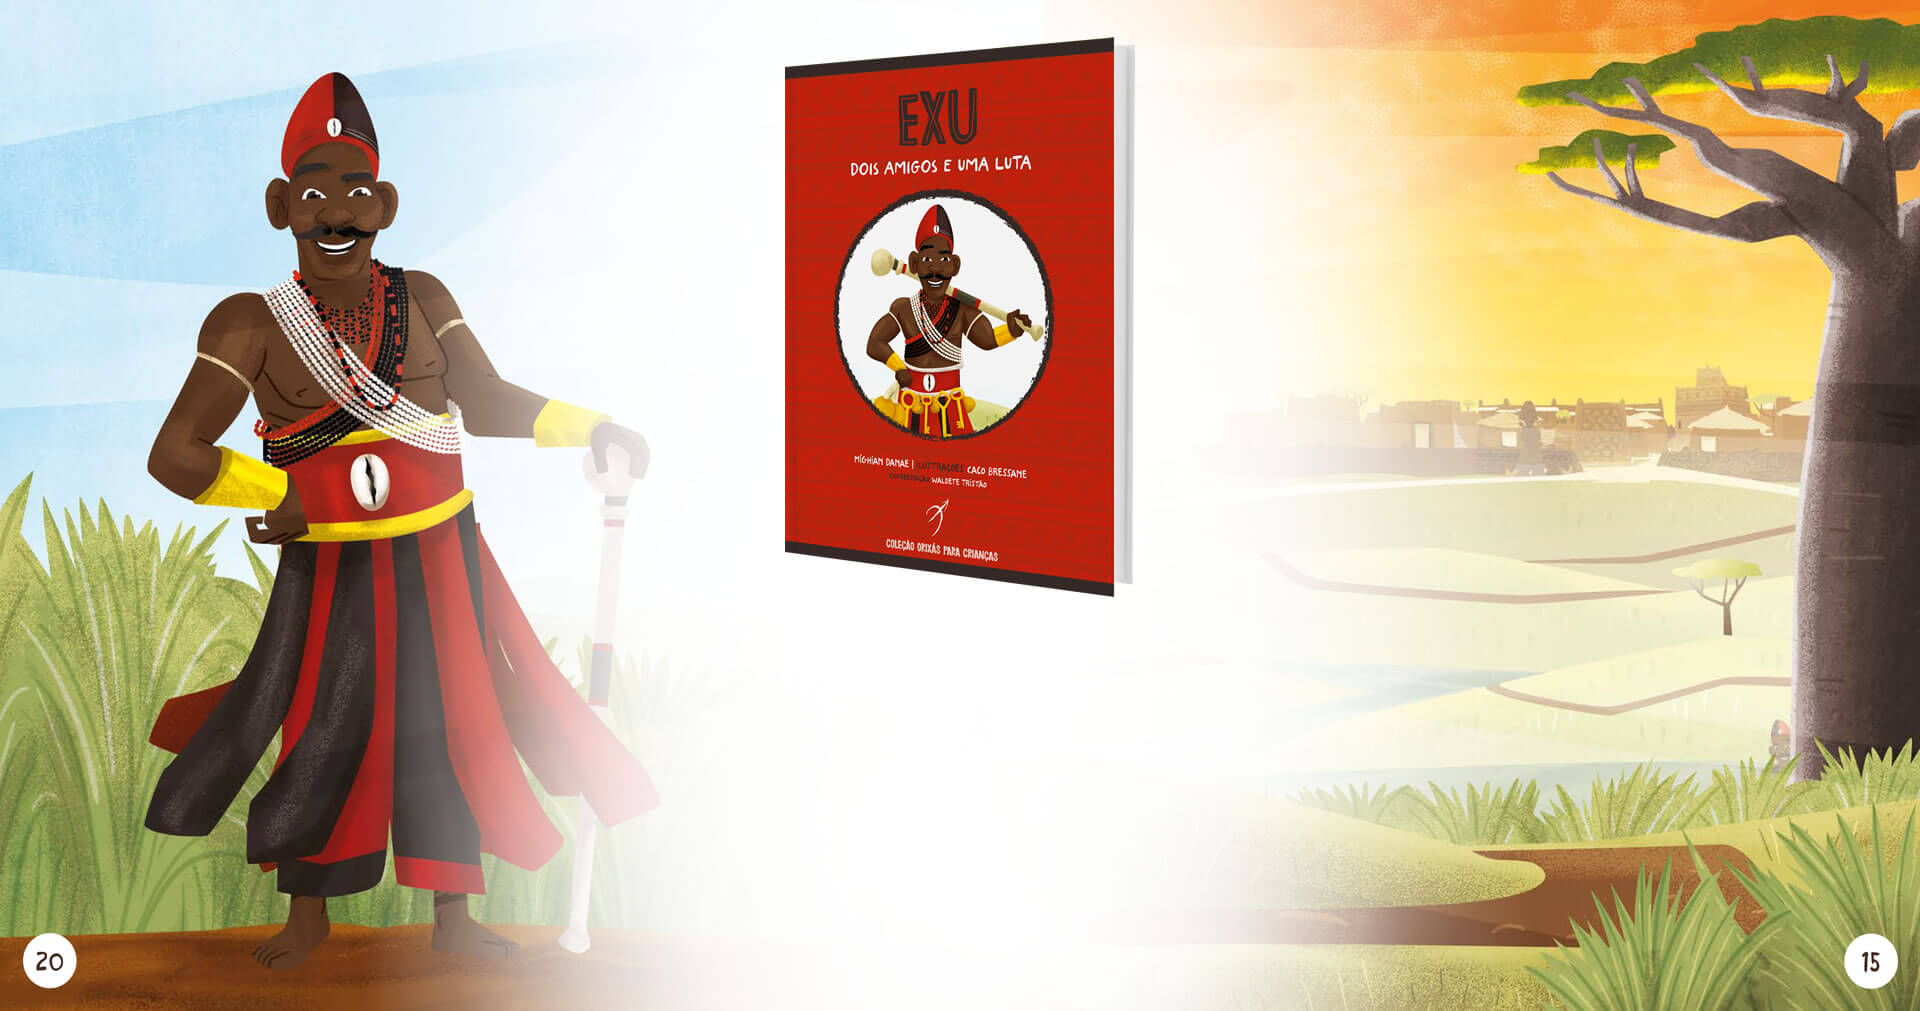 Orixás Para Crianças | In the second volume - Eshu, two friends and a fight -, children will learn one of the most famous myths of Eshu, African God of communication.